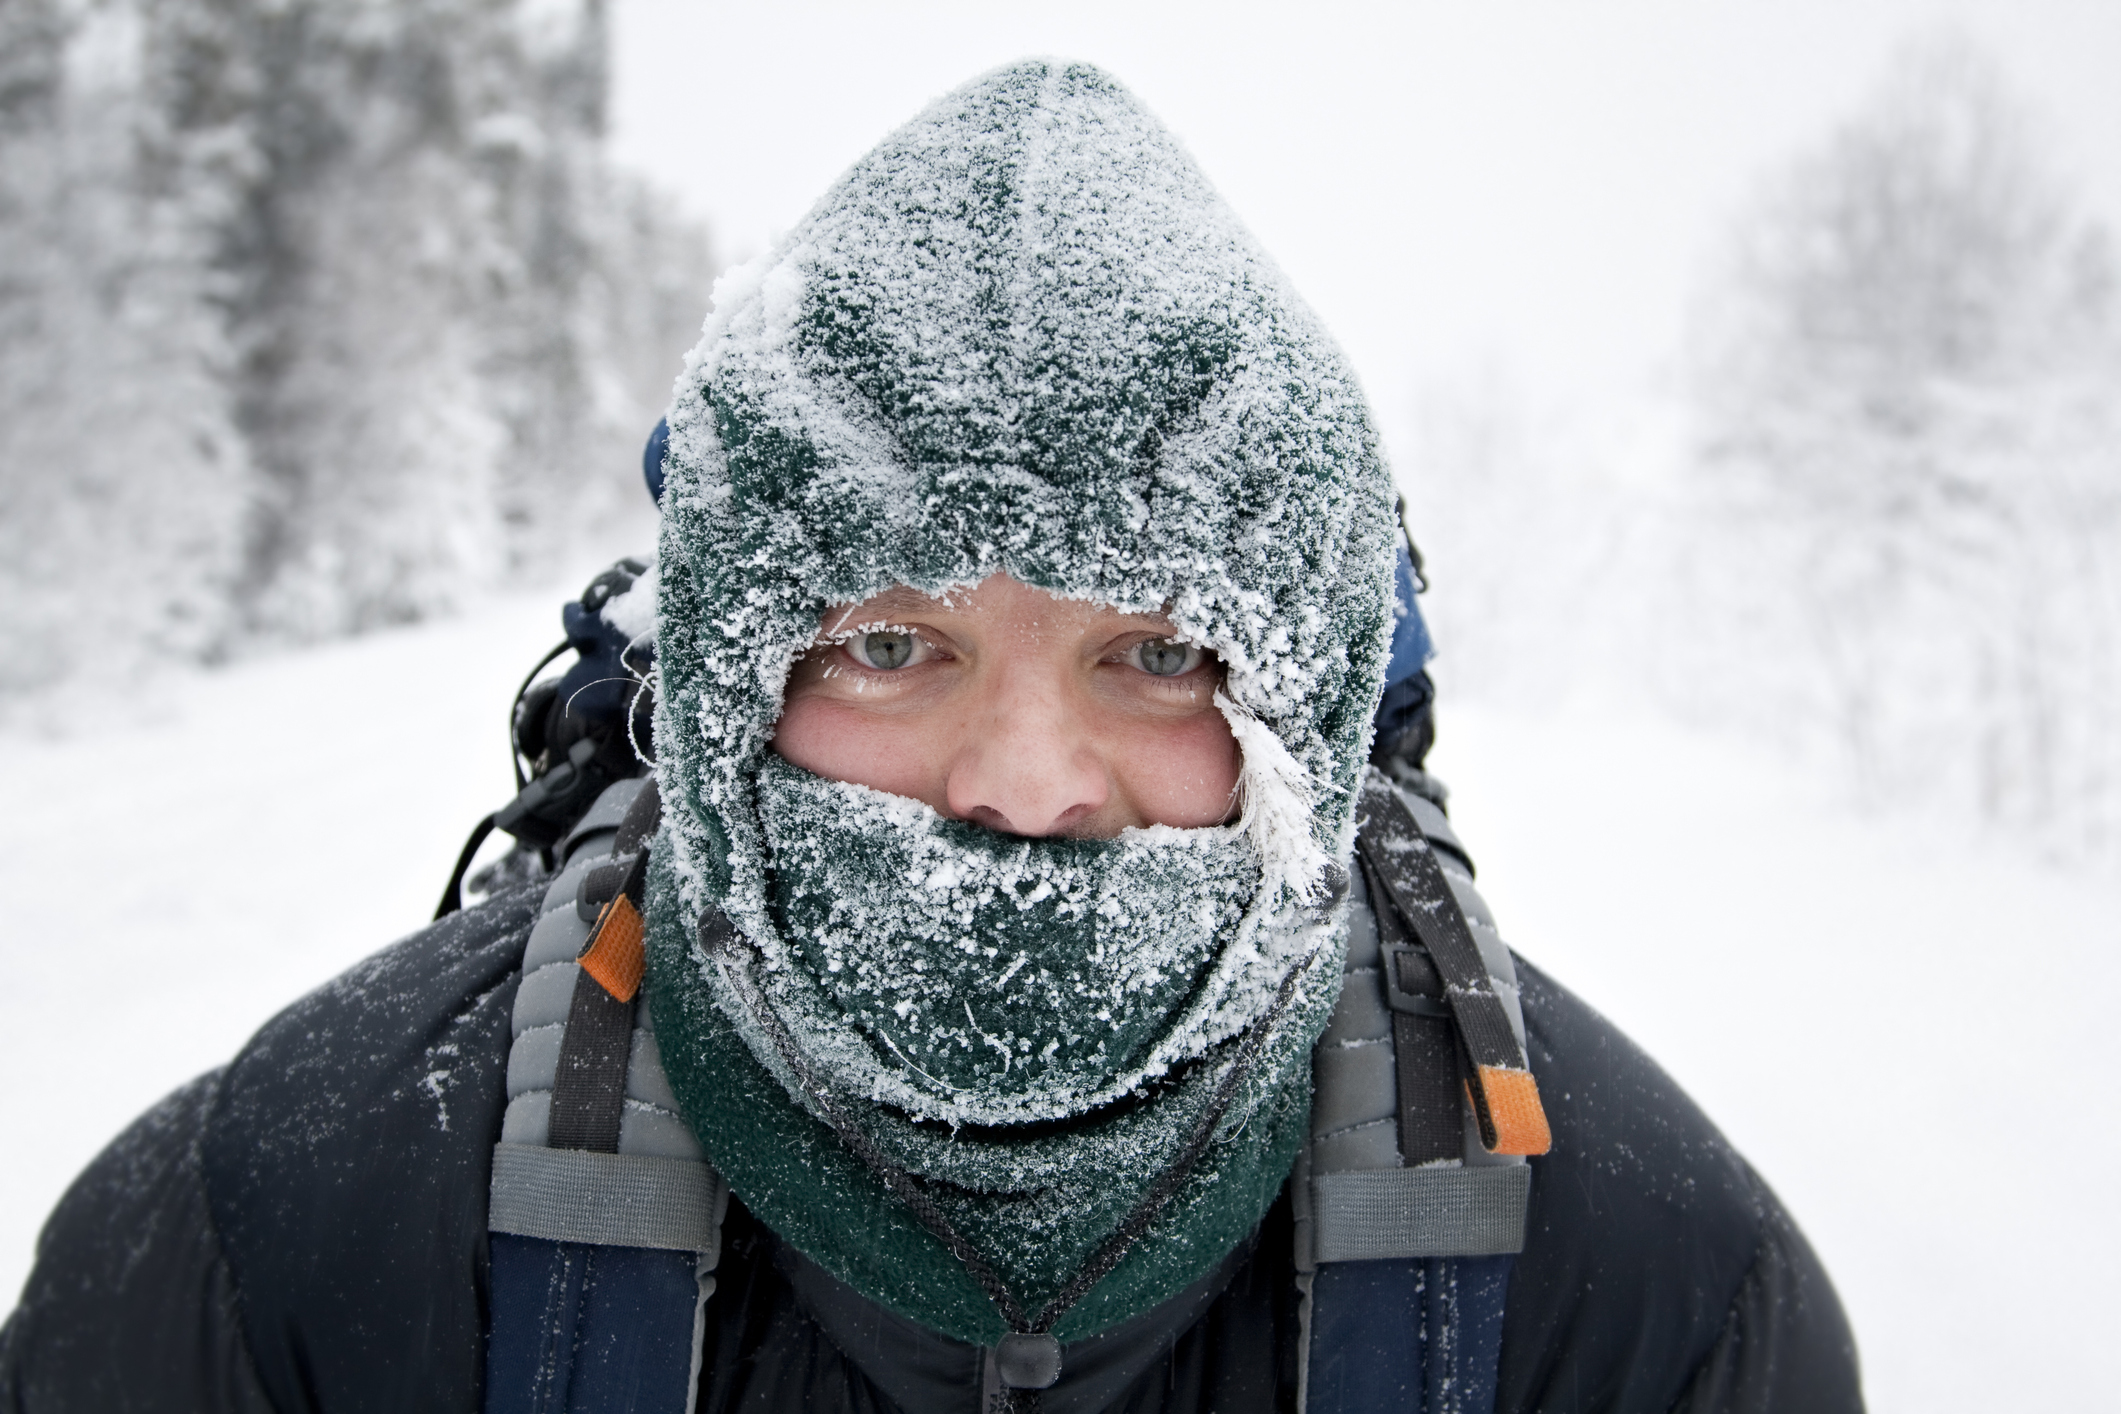 Skipping sunscreen and other mistakes people make in extreme cold